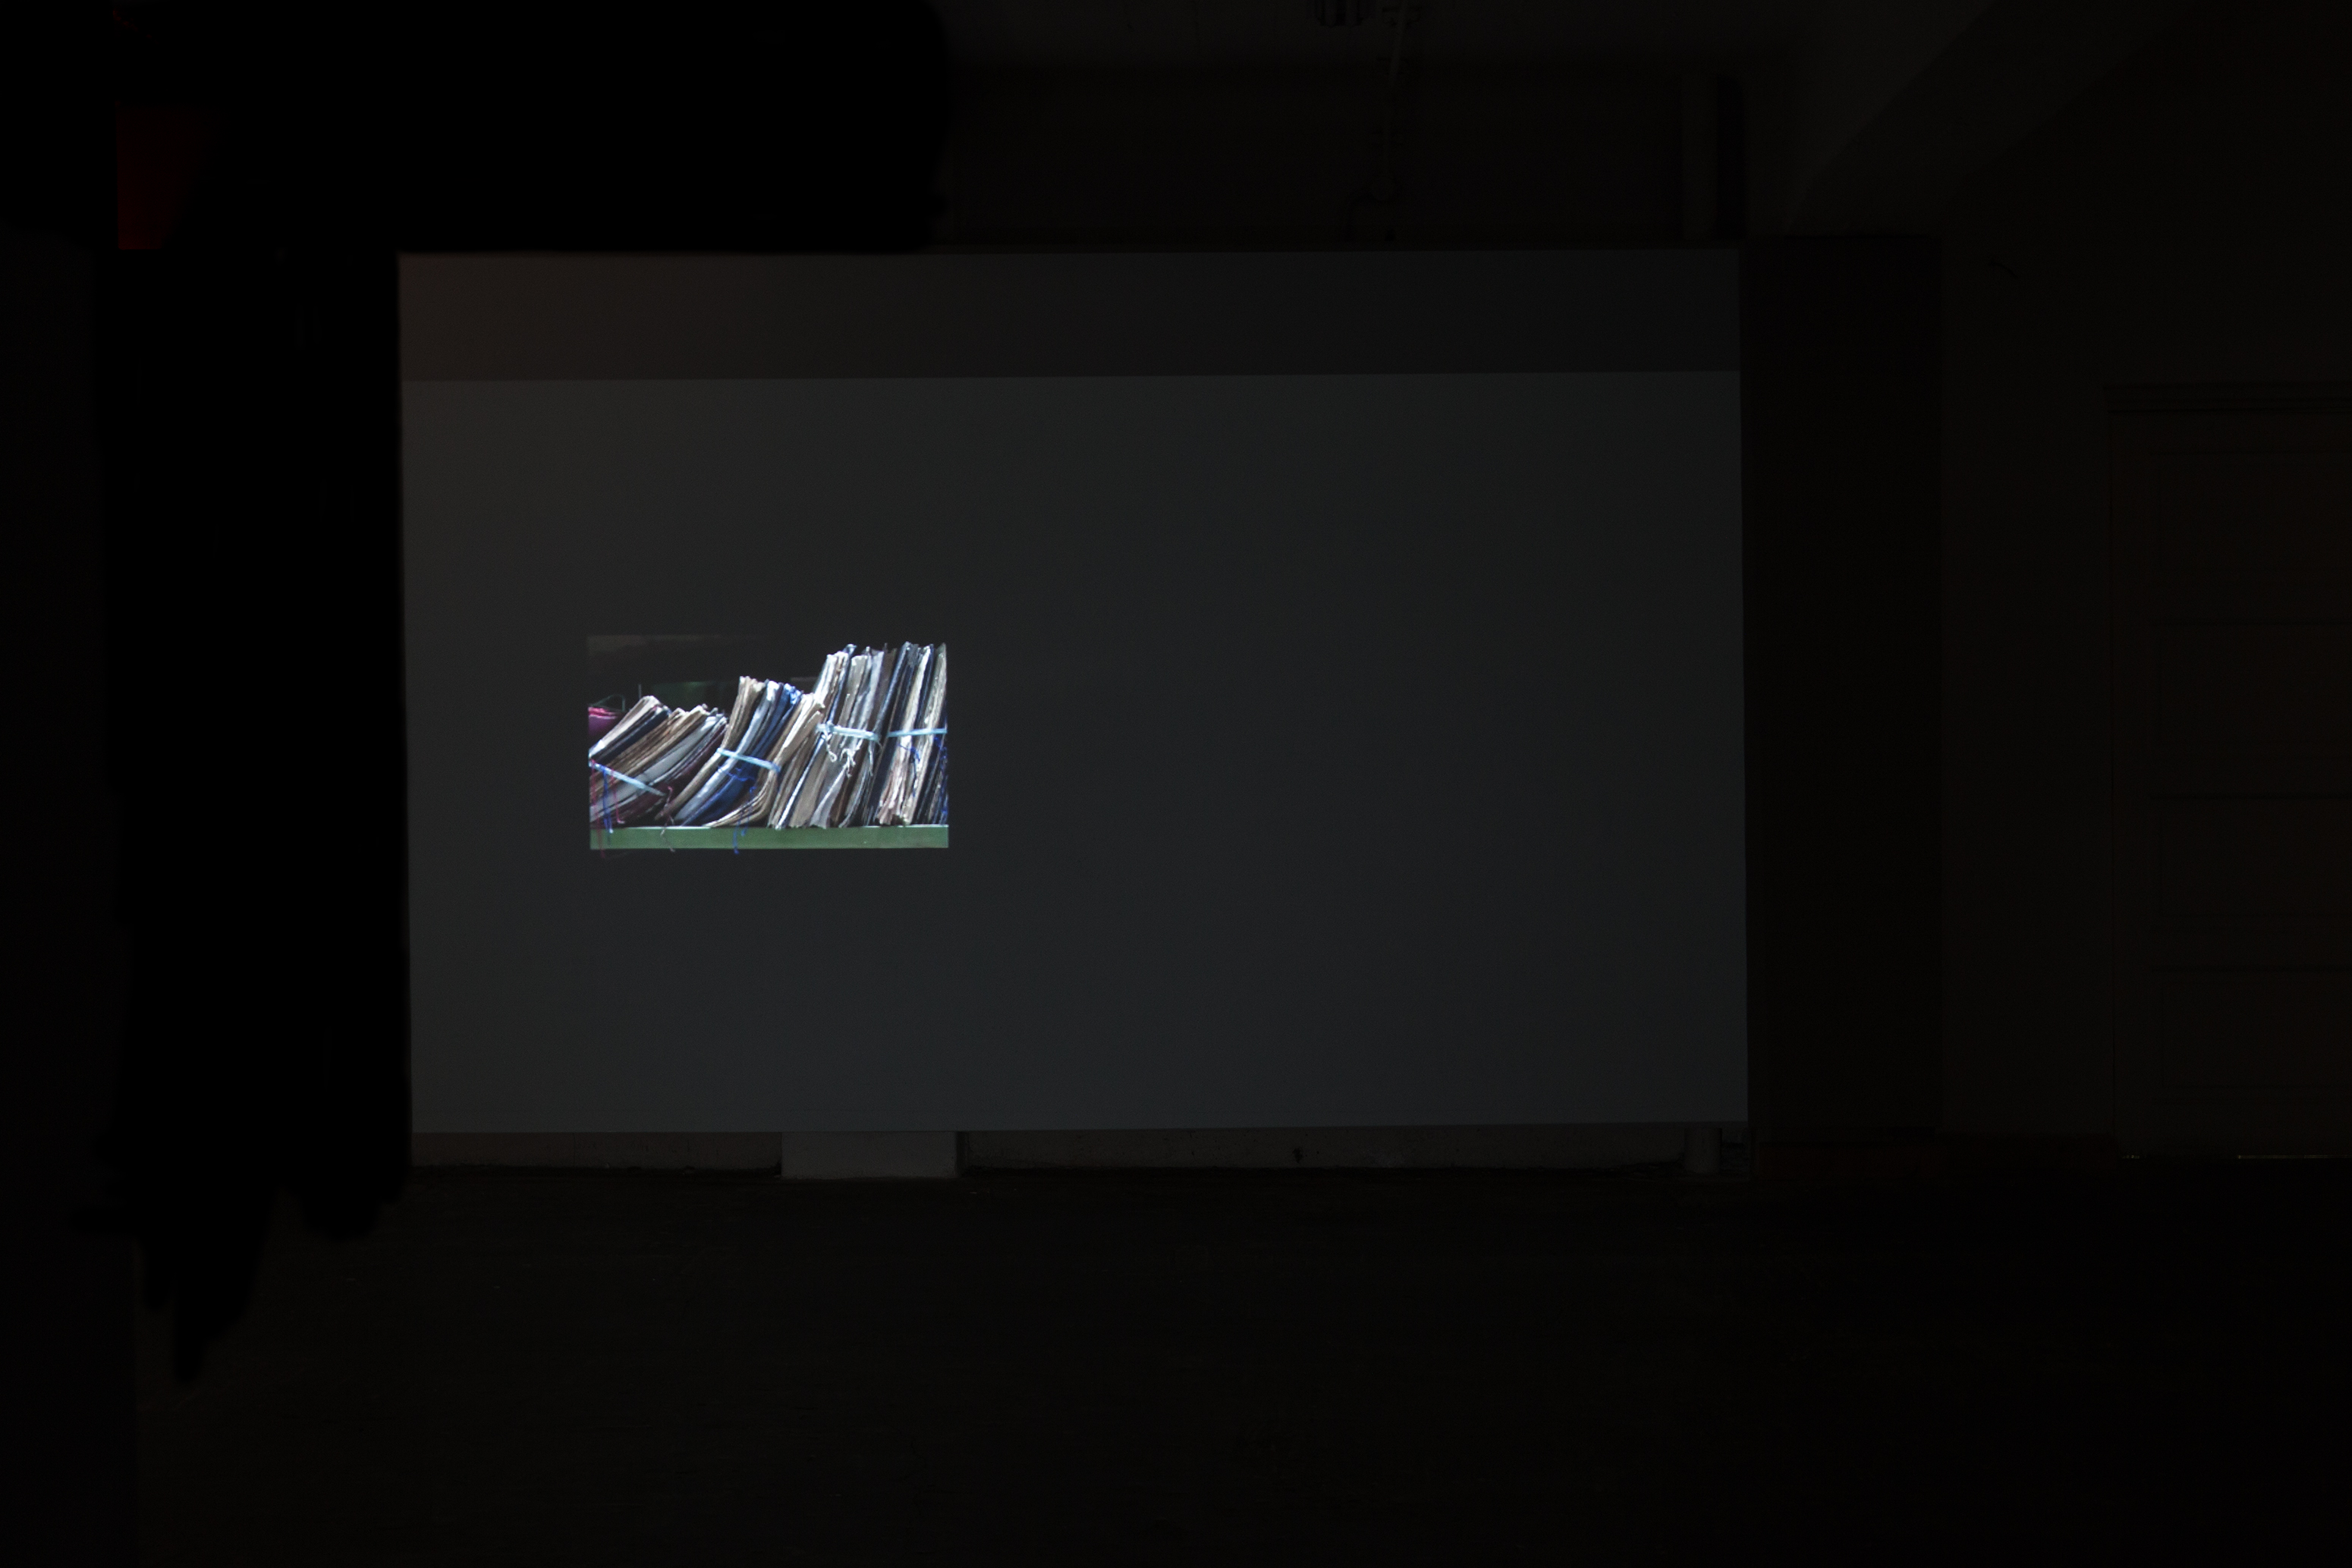 Installation view, Memorizing, loop projection, 6 images